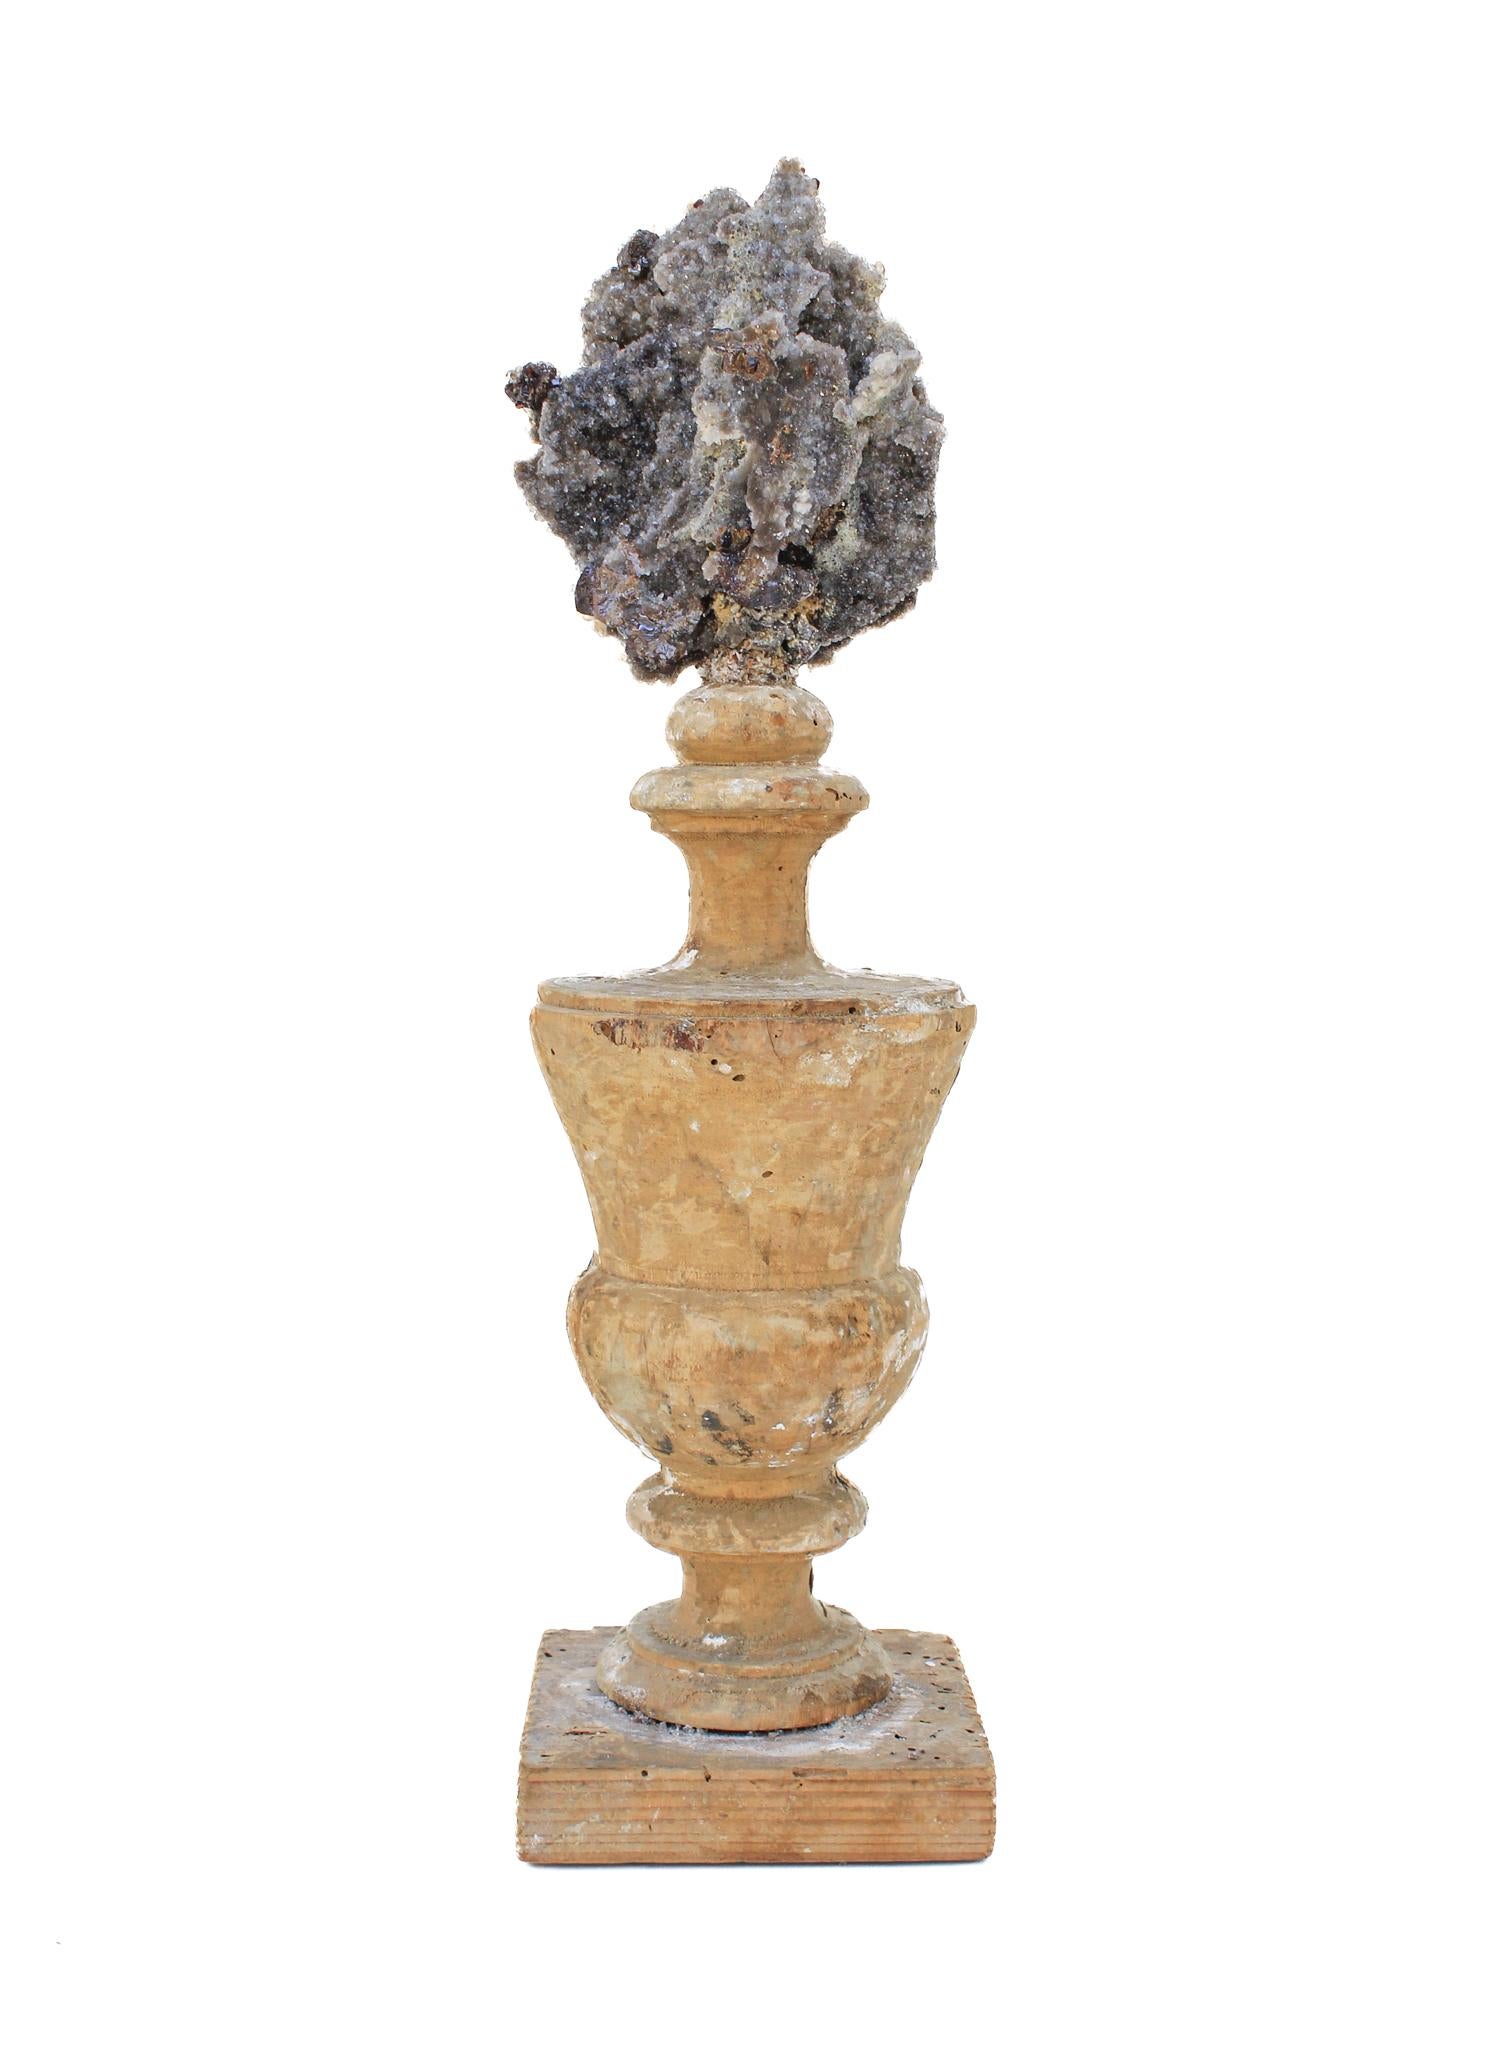 17th Century 'Florence Fragment' Vase with Calcite Crystals & Sphalerite In Distressed Condition For Sale In Dublin, Dalkey